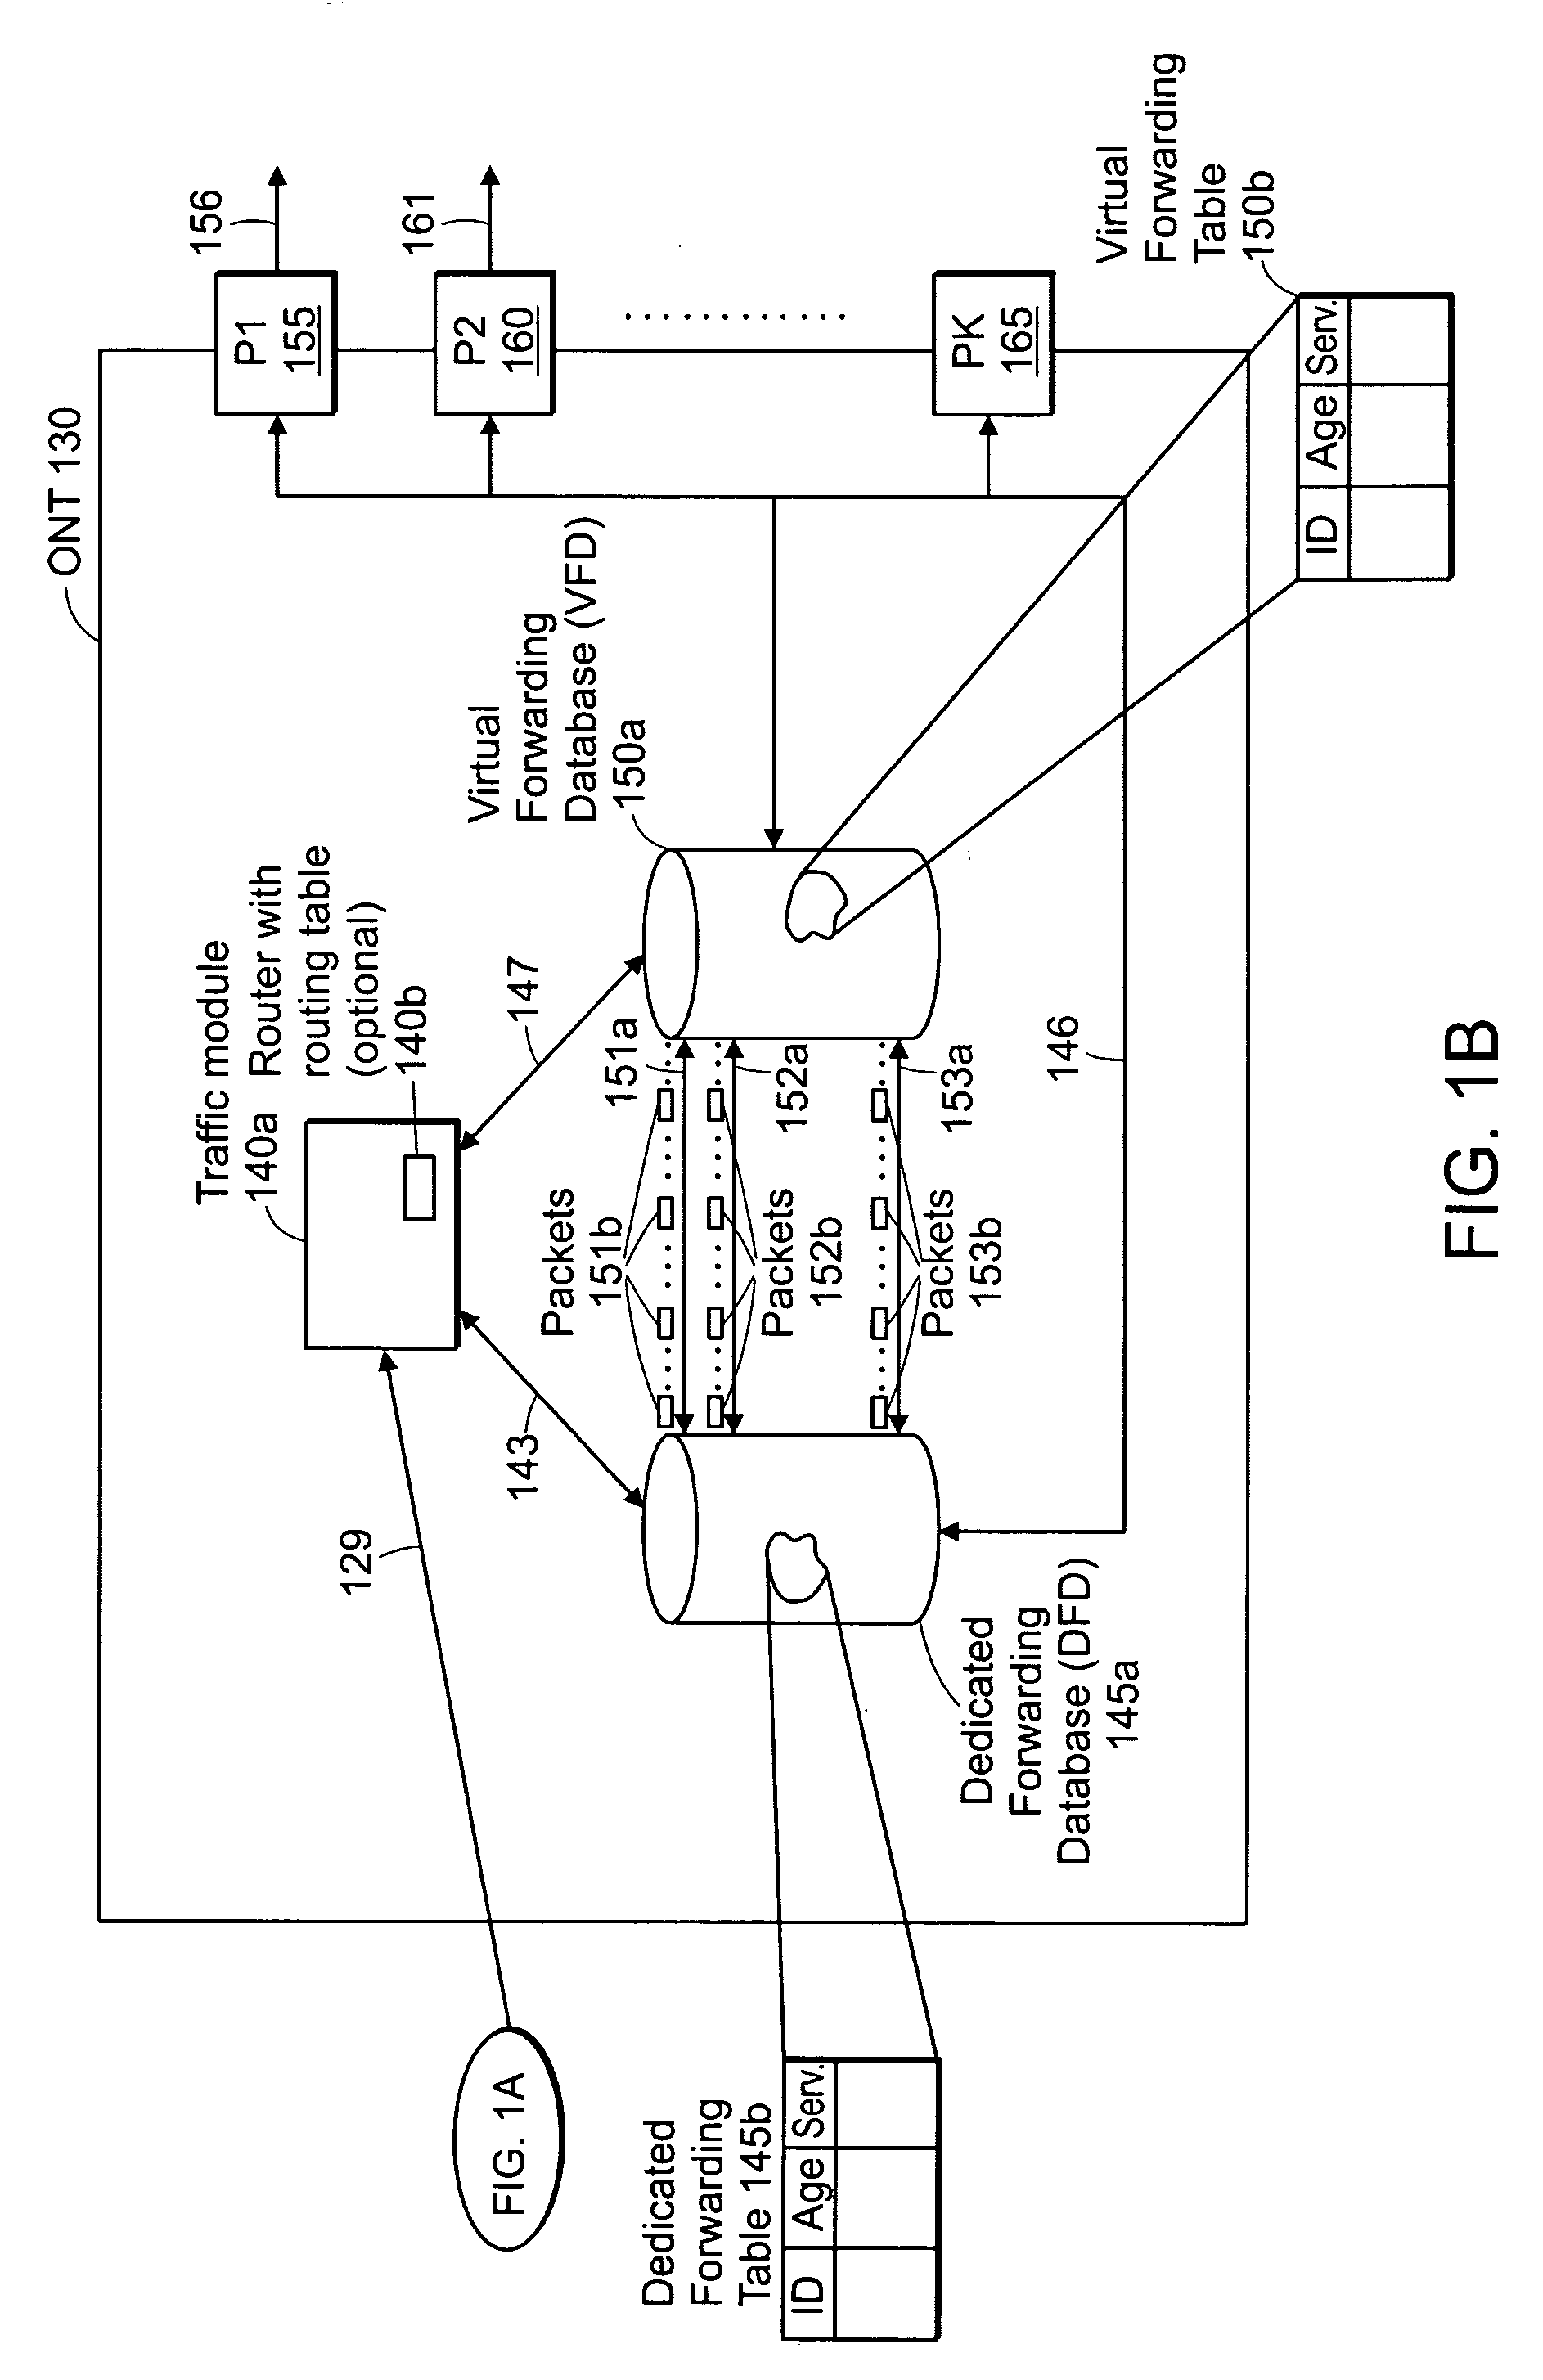 Method and apparatus for managing traffic flow of forwarding entries through a virtual forwarding database of a network node